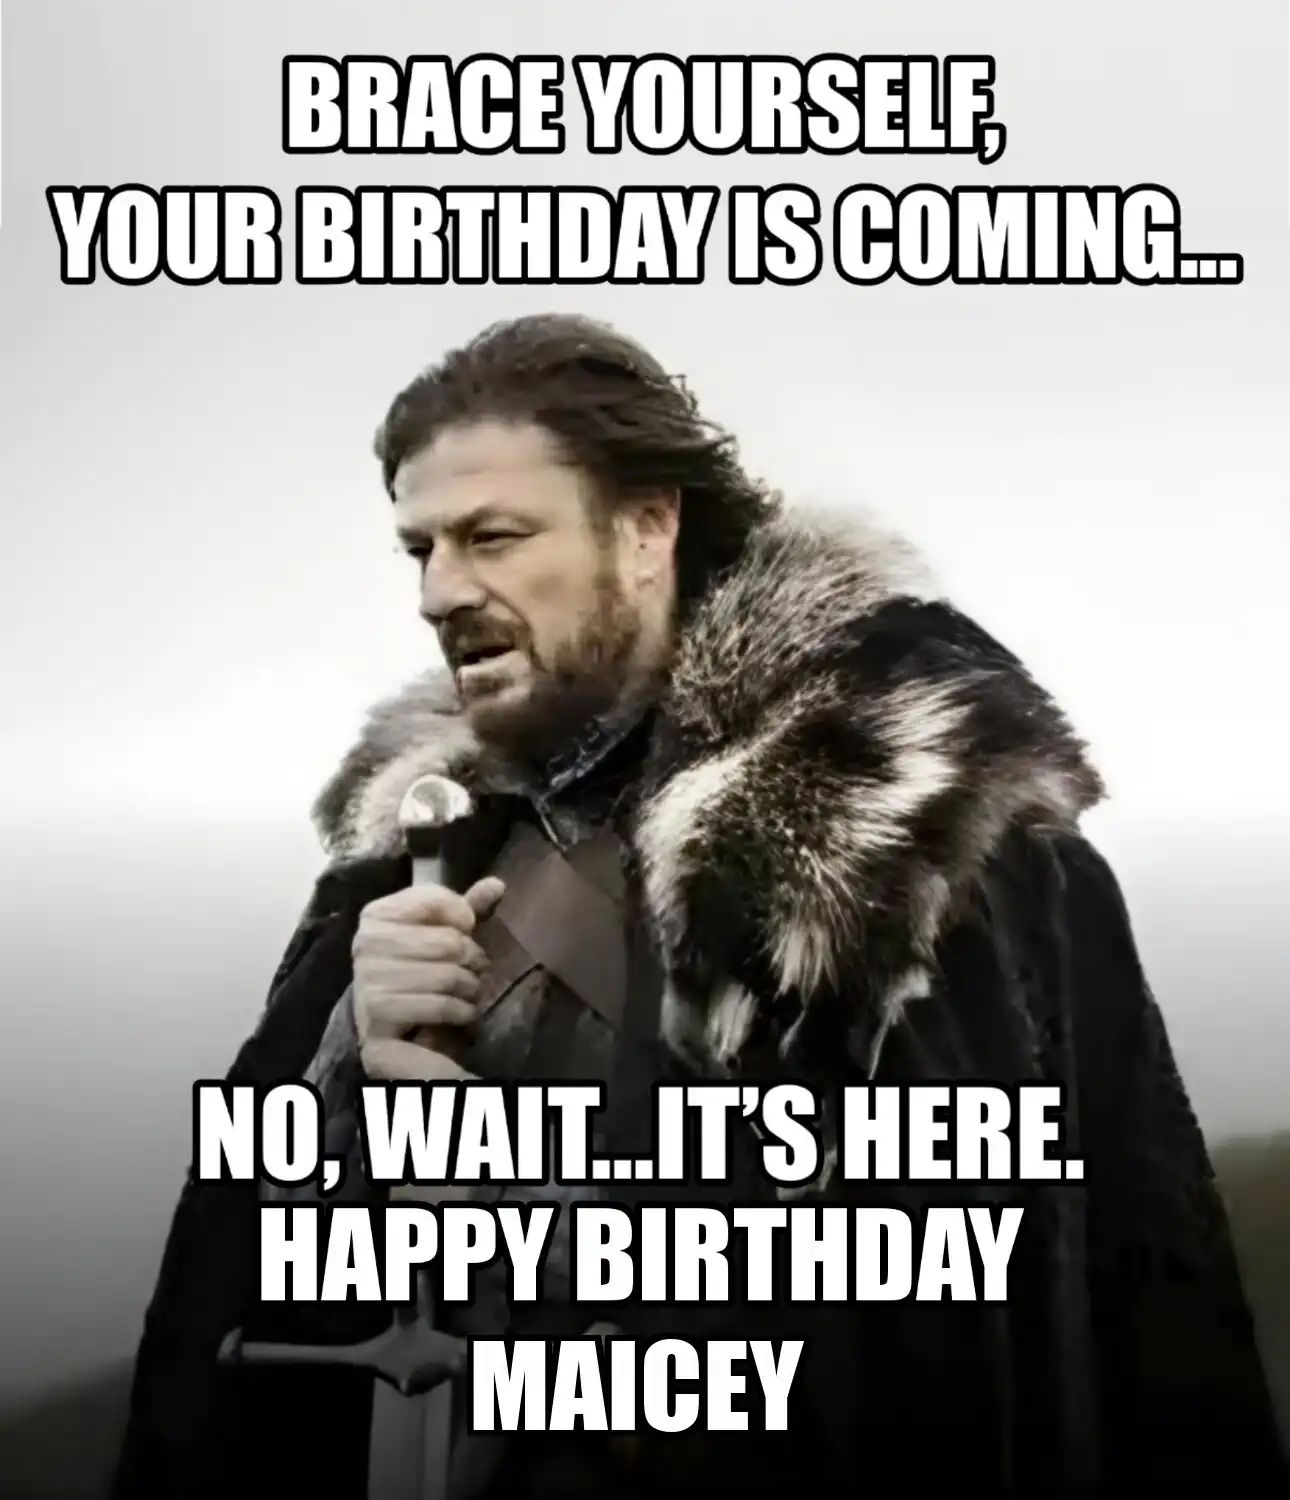 Happy Birthday Maicey Brace Yourself Your Birthday Is Coming Meme